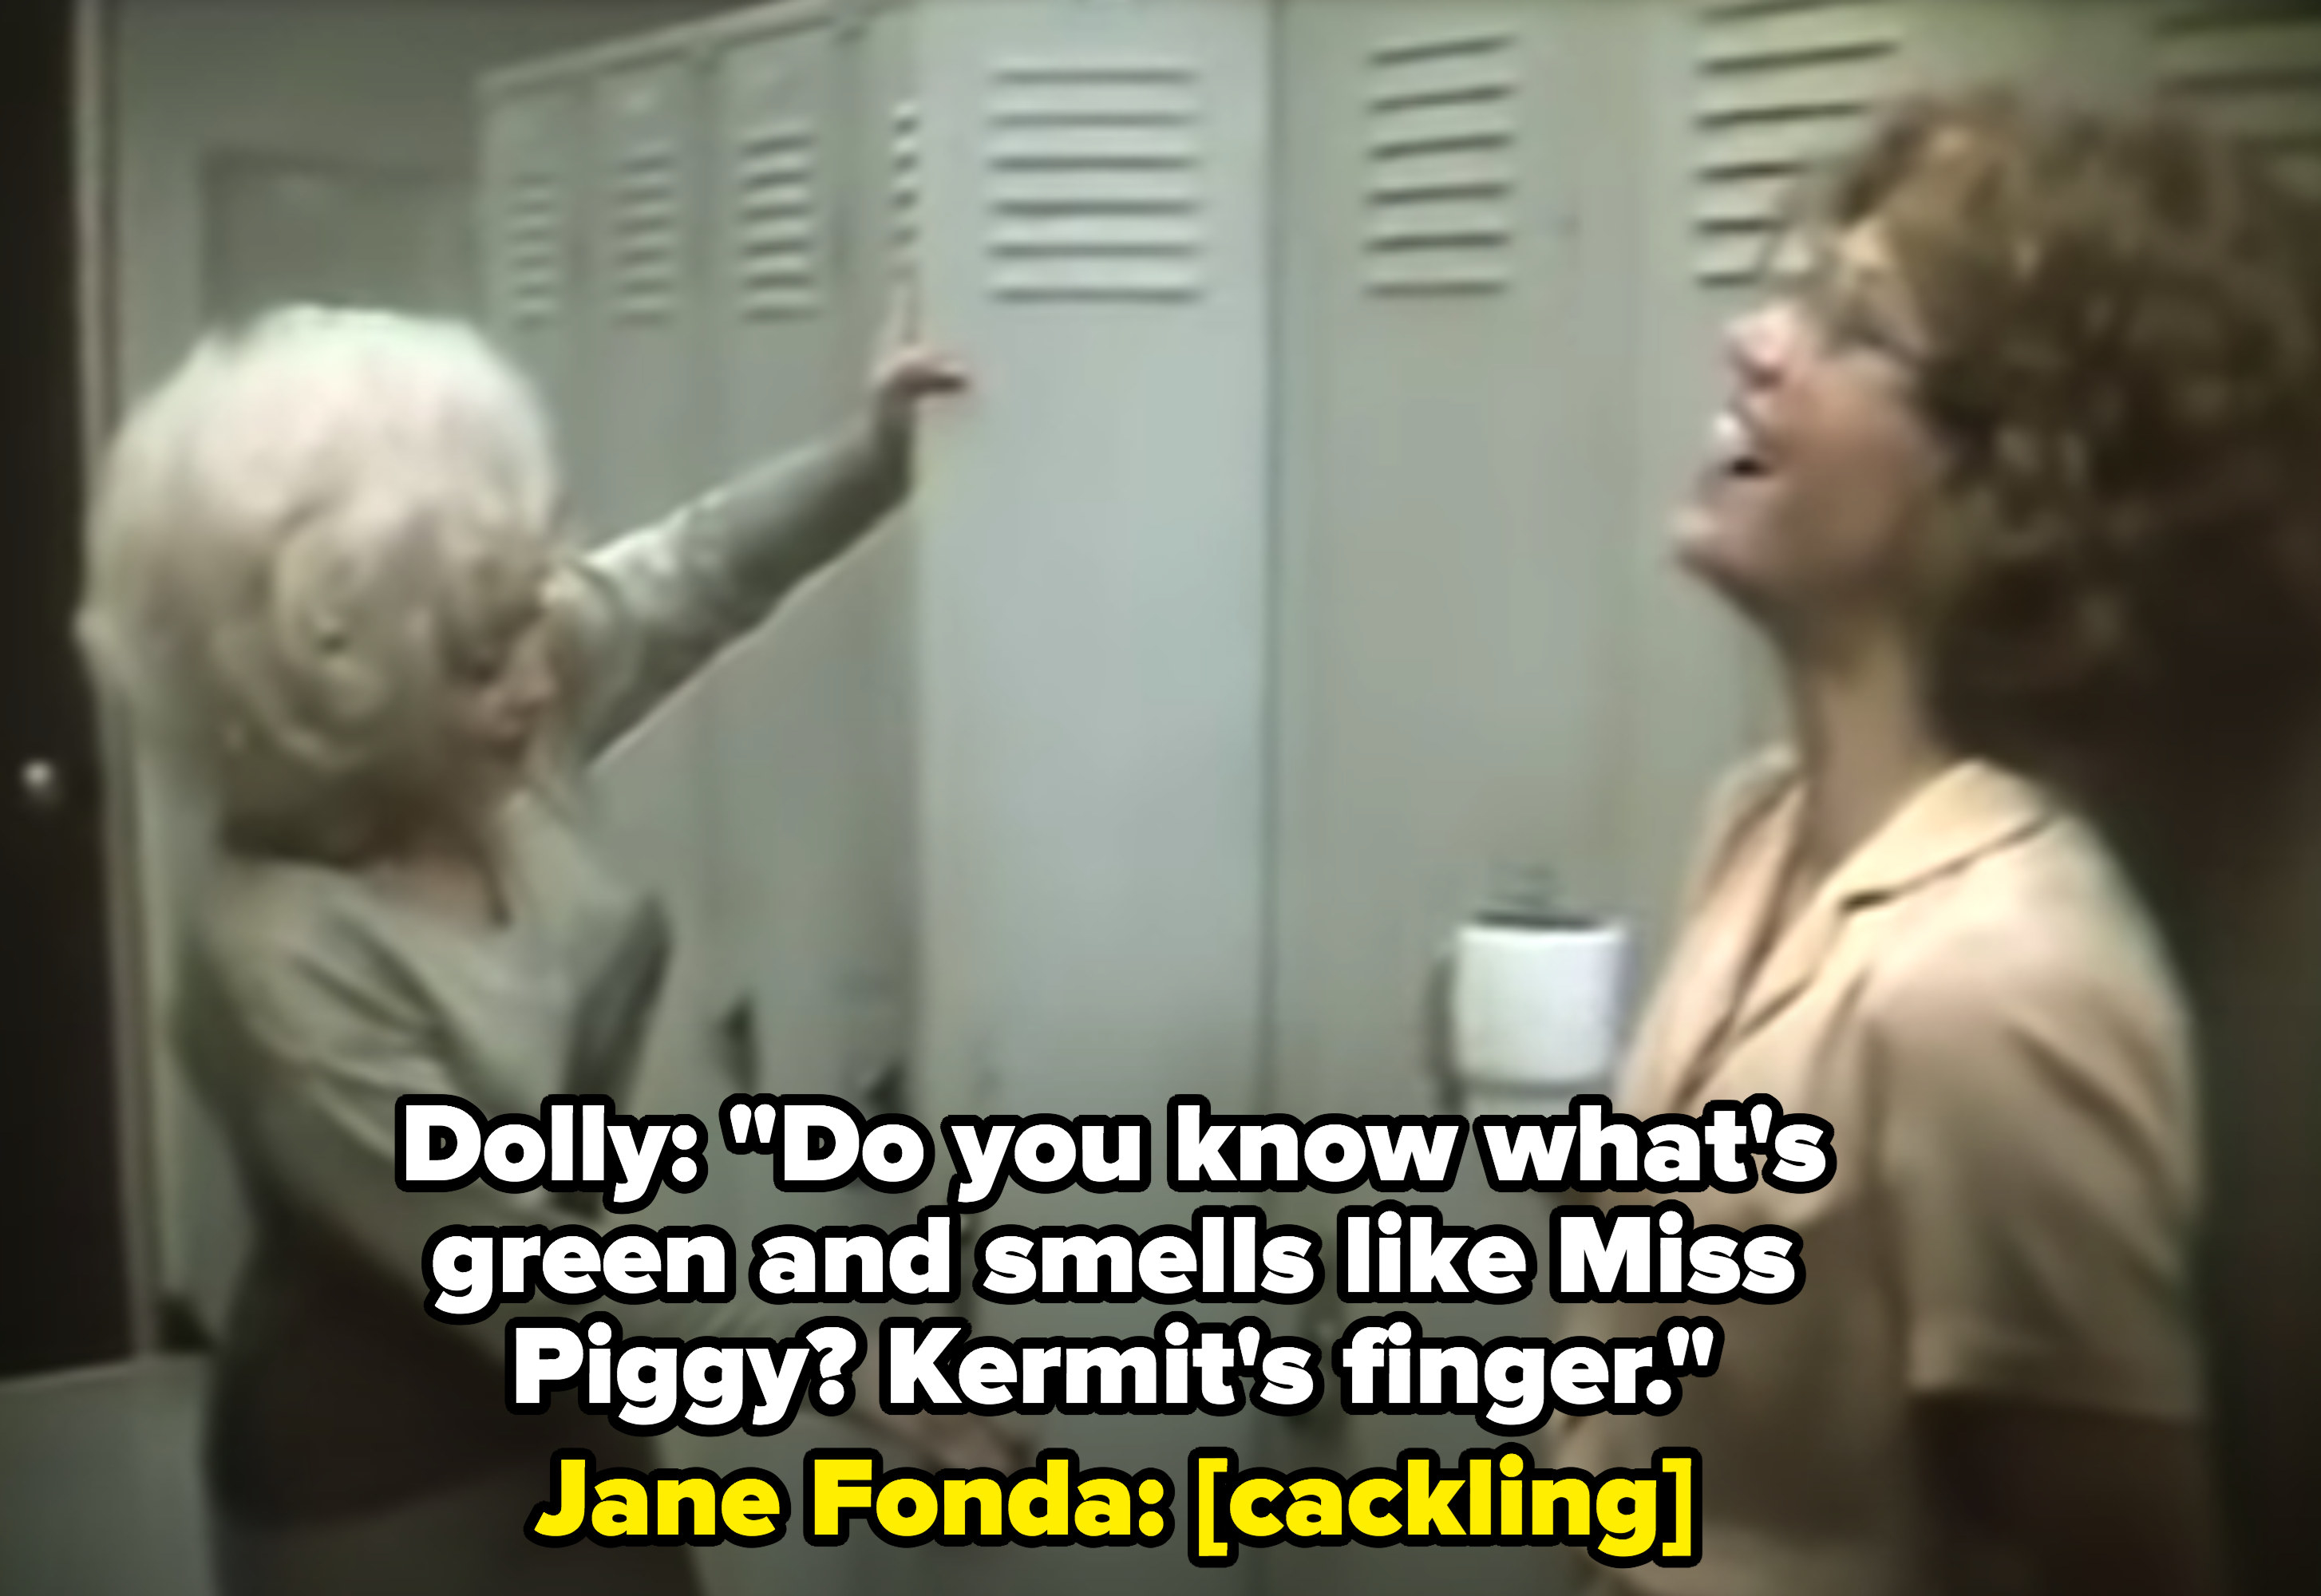 Dolly: &quot;Do you know what&#x27;s green and smells like Missy Piggy? Kermit&#x27;s finger.&quot; Jane Fonda laughs in response